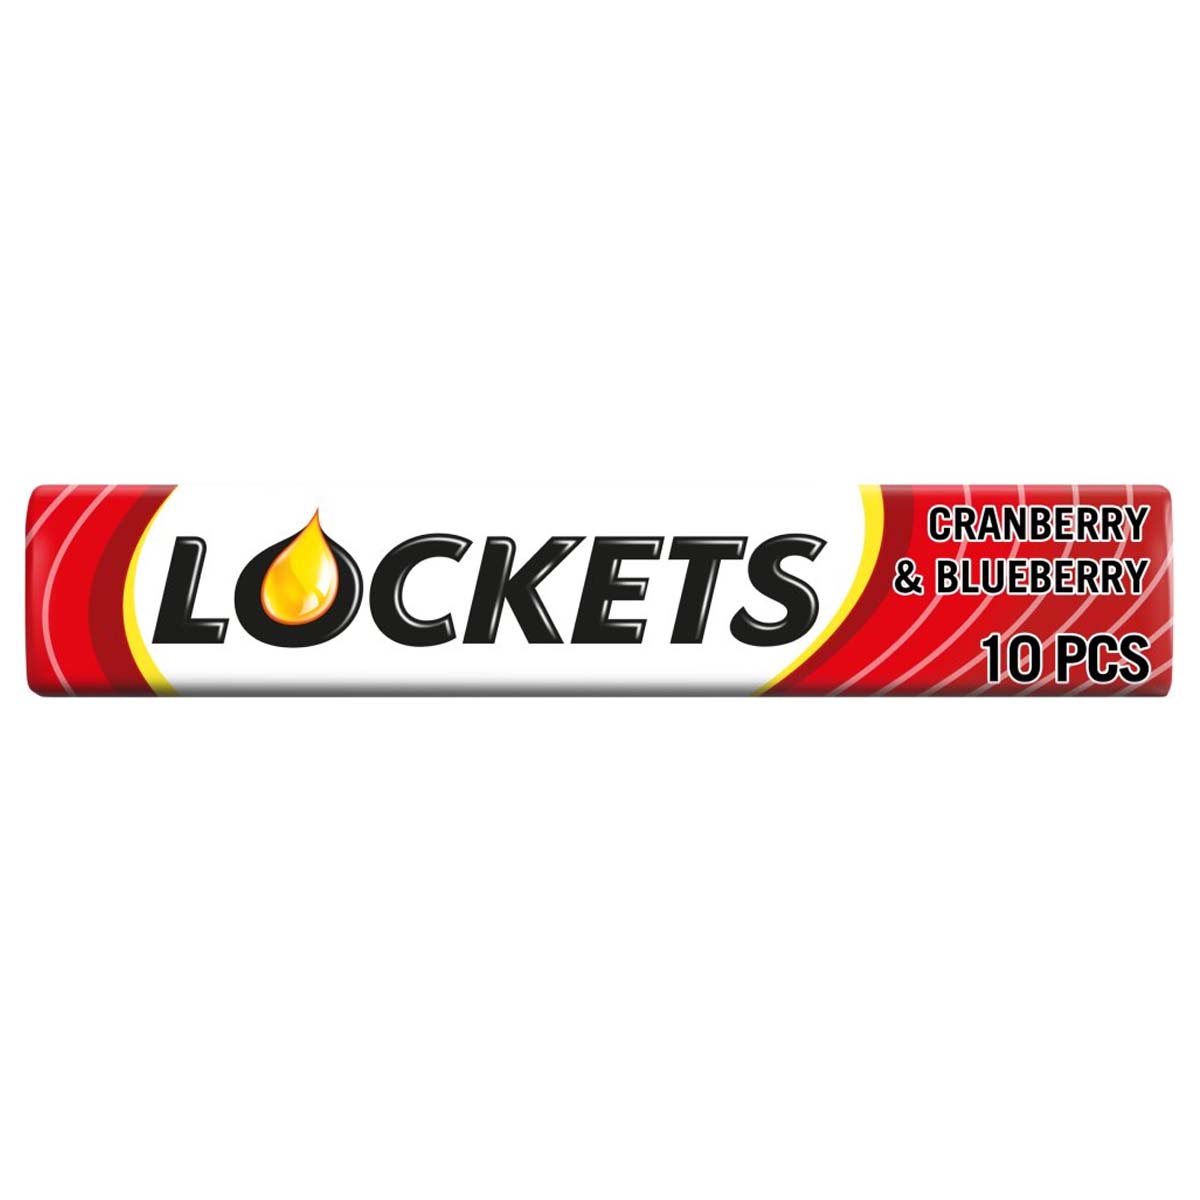 Lockets - Cranberry & Blueberry Cough Sweet Menthol Lozenges - 41g - Continental Food Store